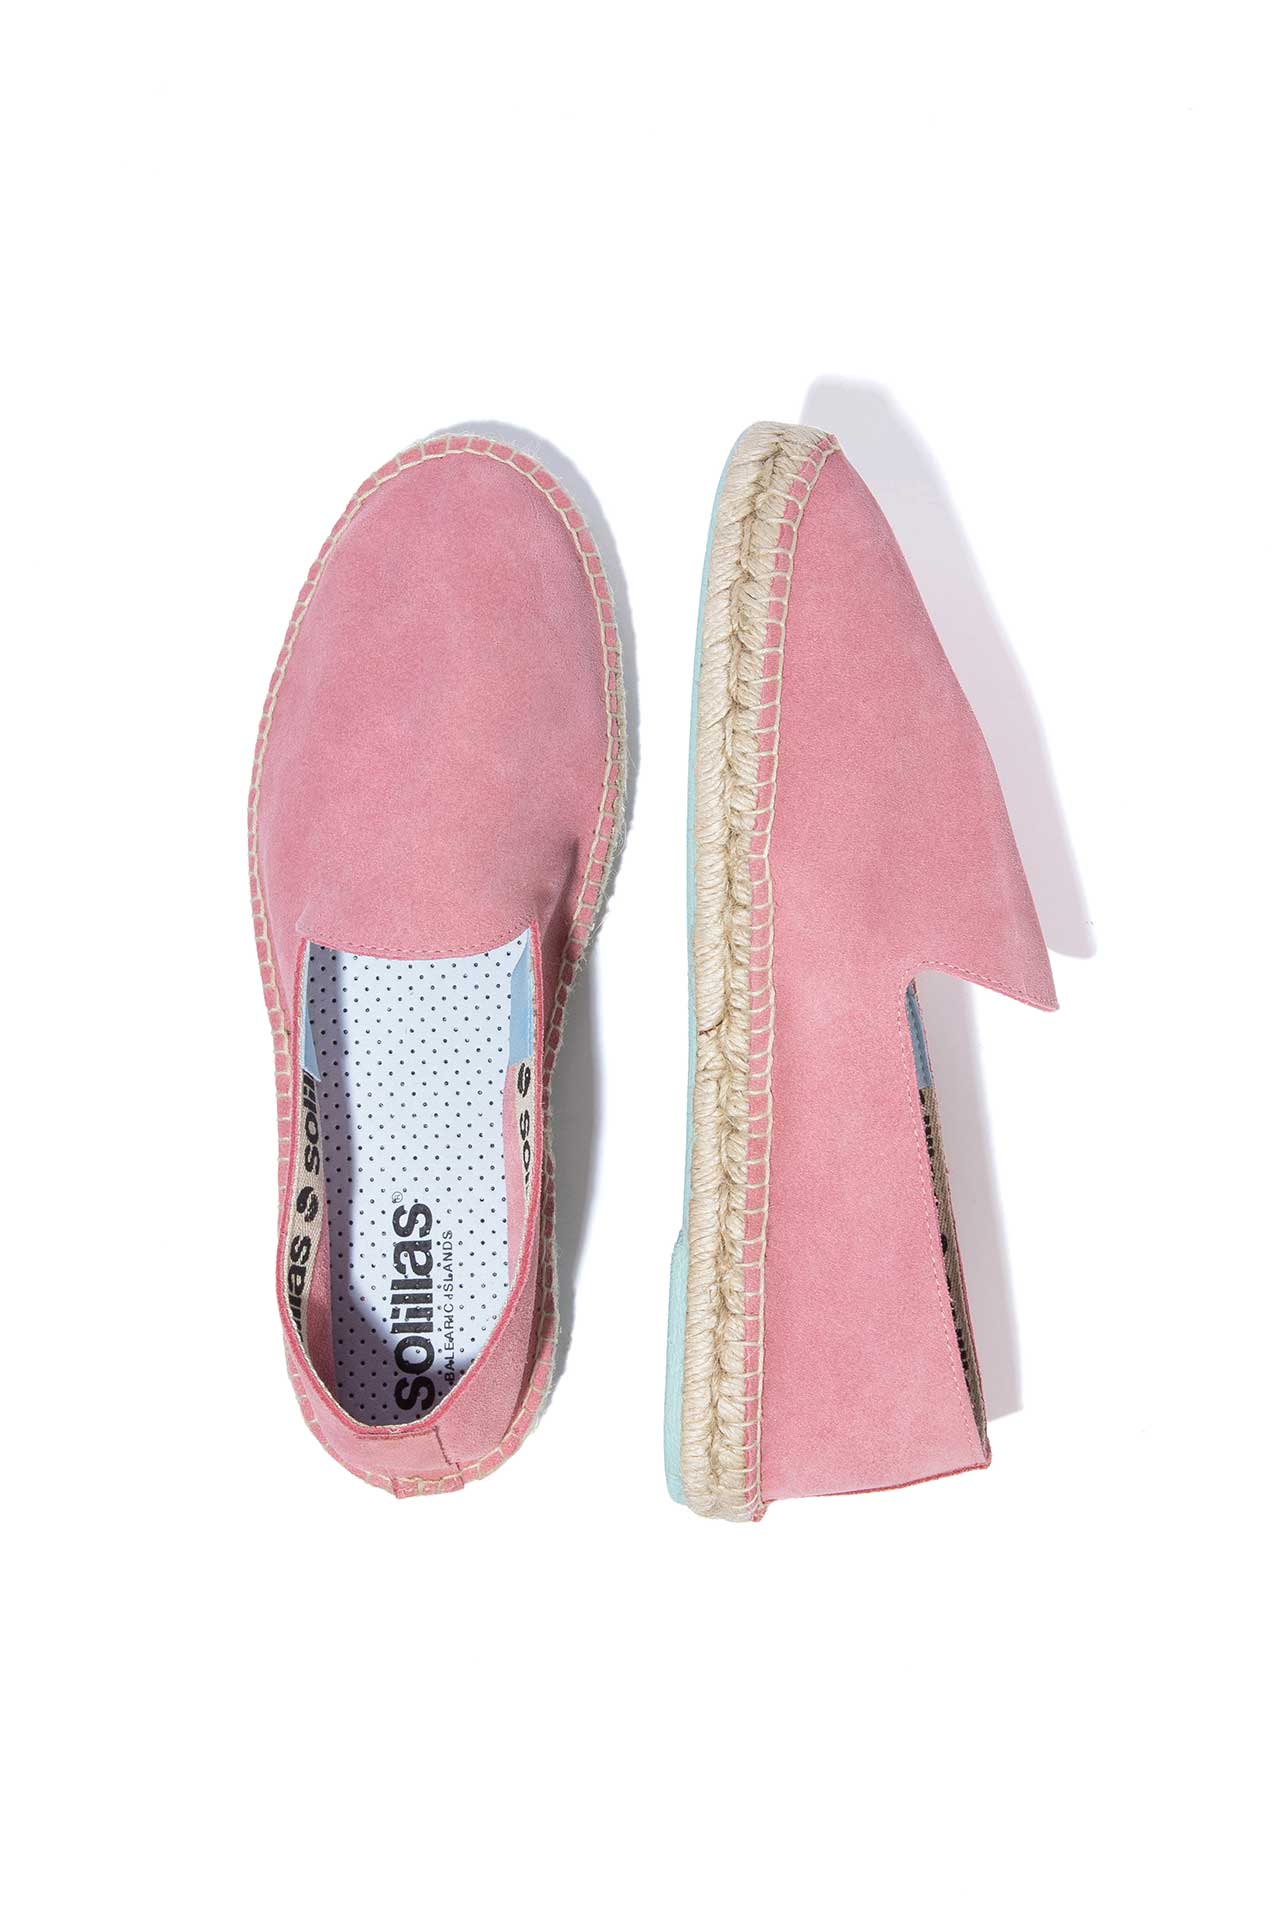 Leather espadrilles Louis Vuitton Pink size 36 EU in Leather - 27477928